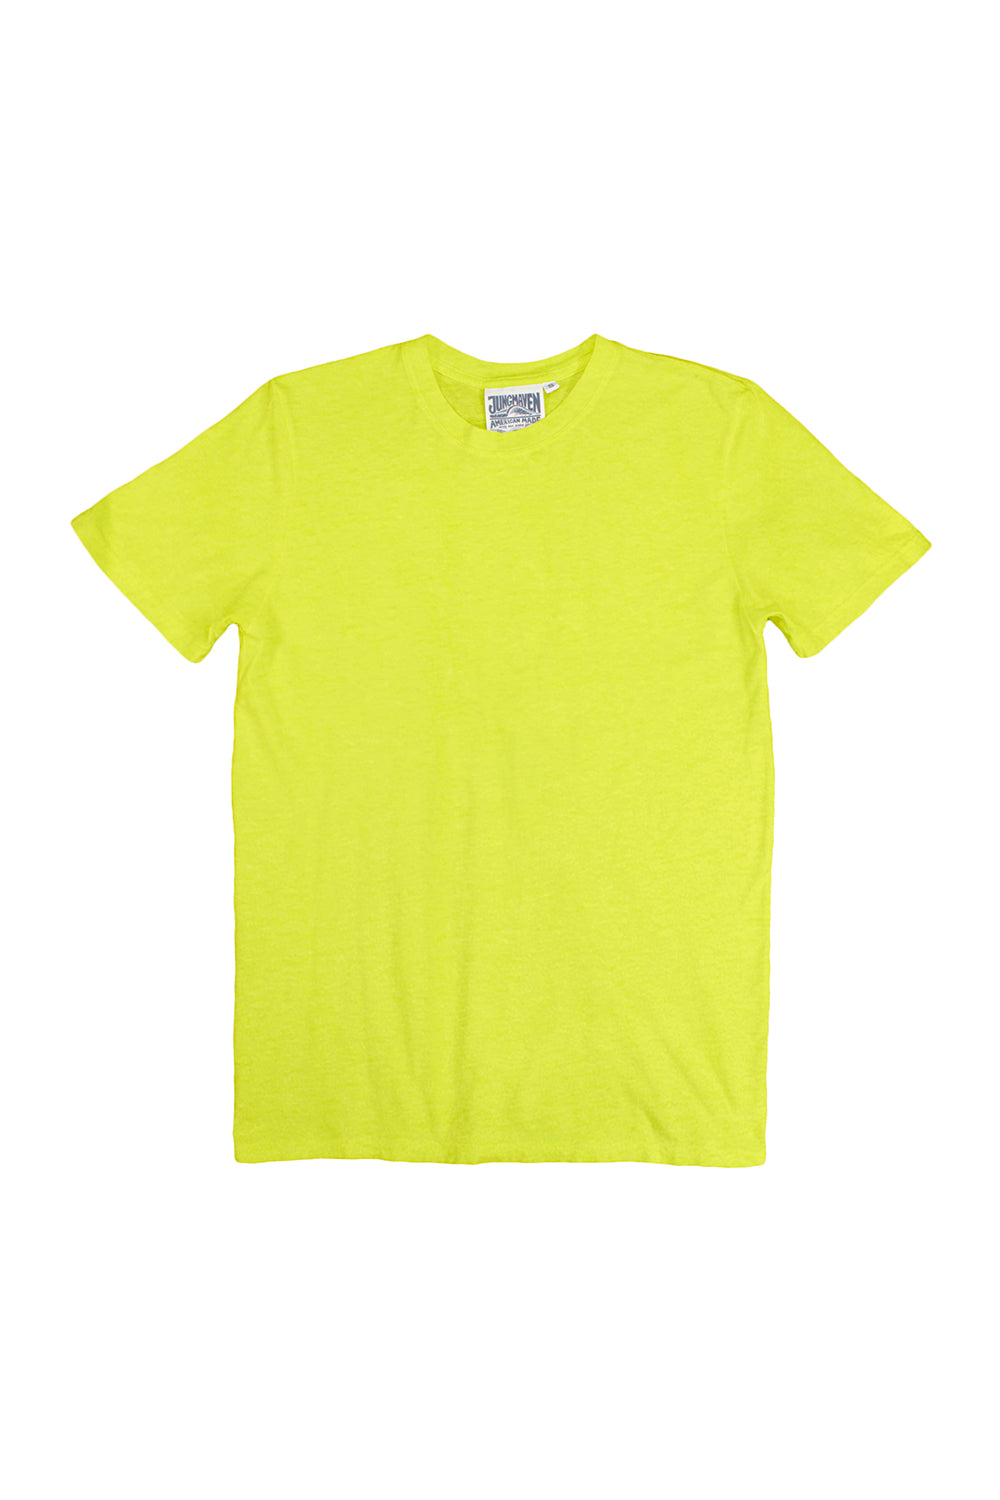 Basic Tee | Jungmaven Hemp Clothing & Accessories / Color: Limelight